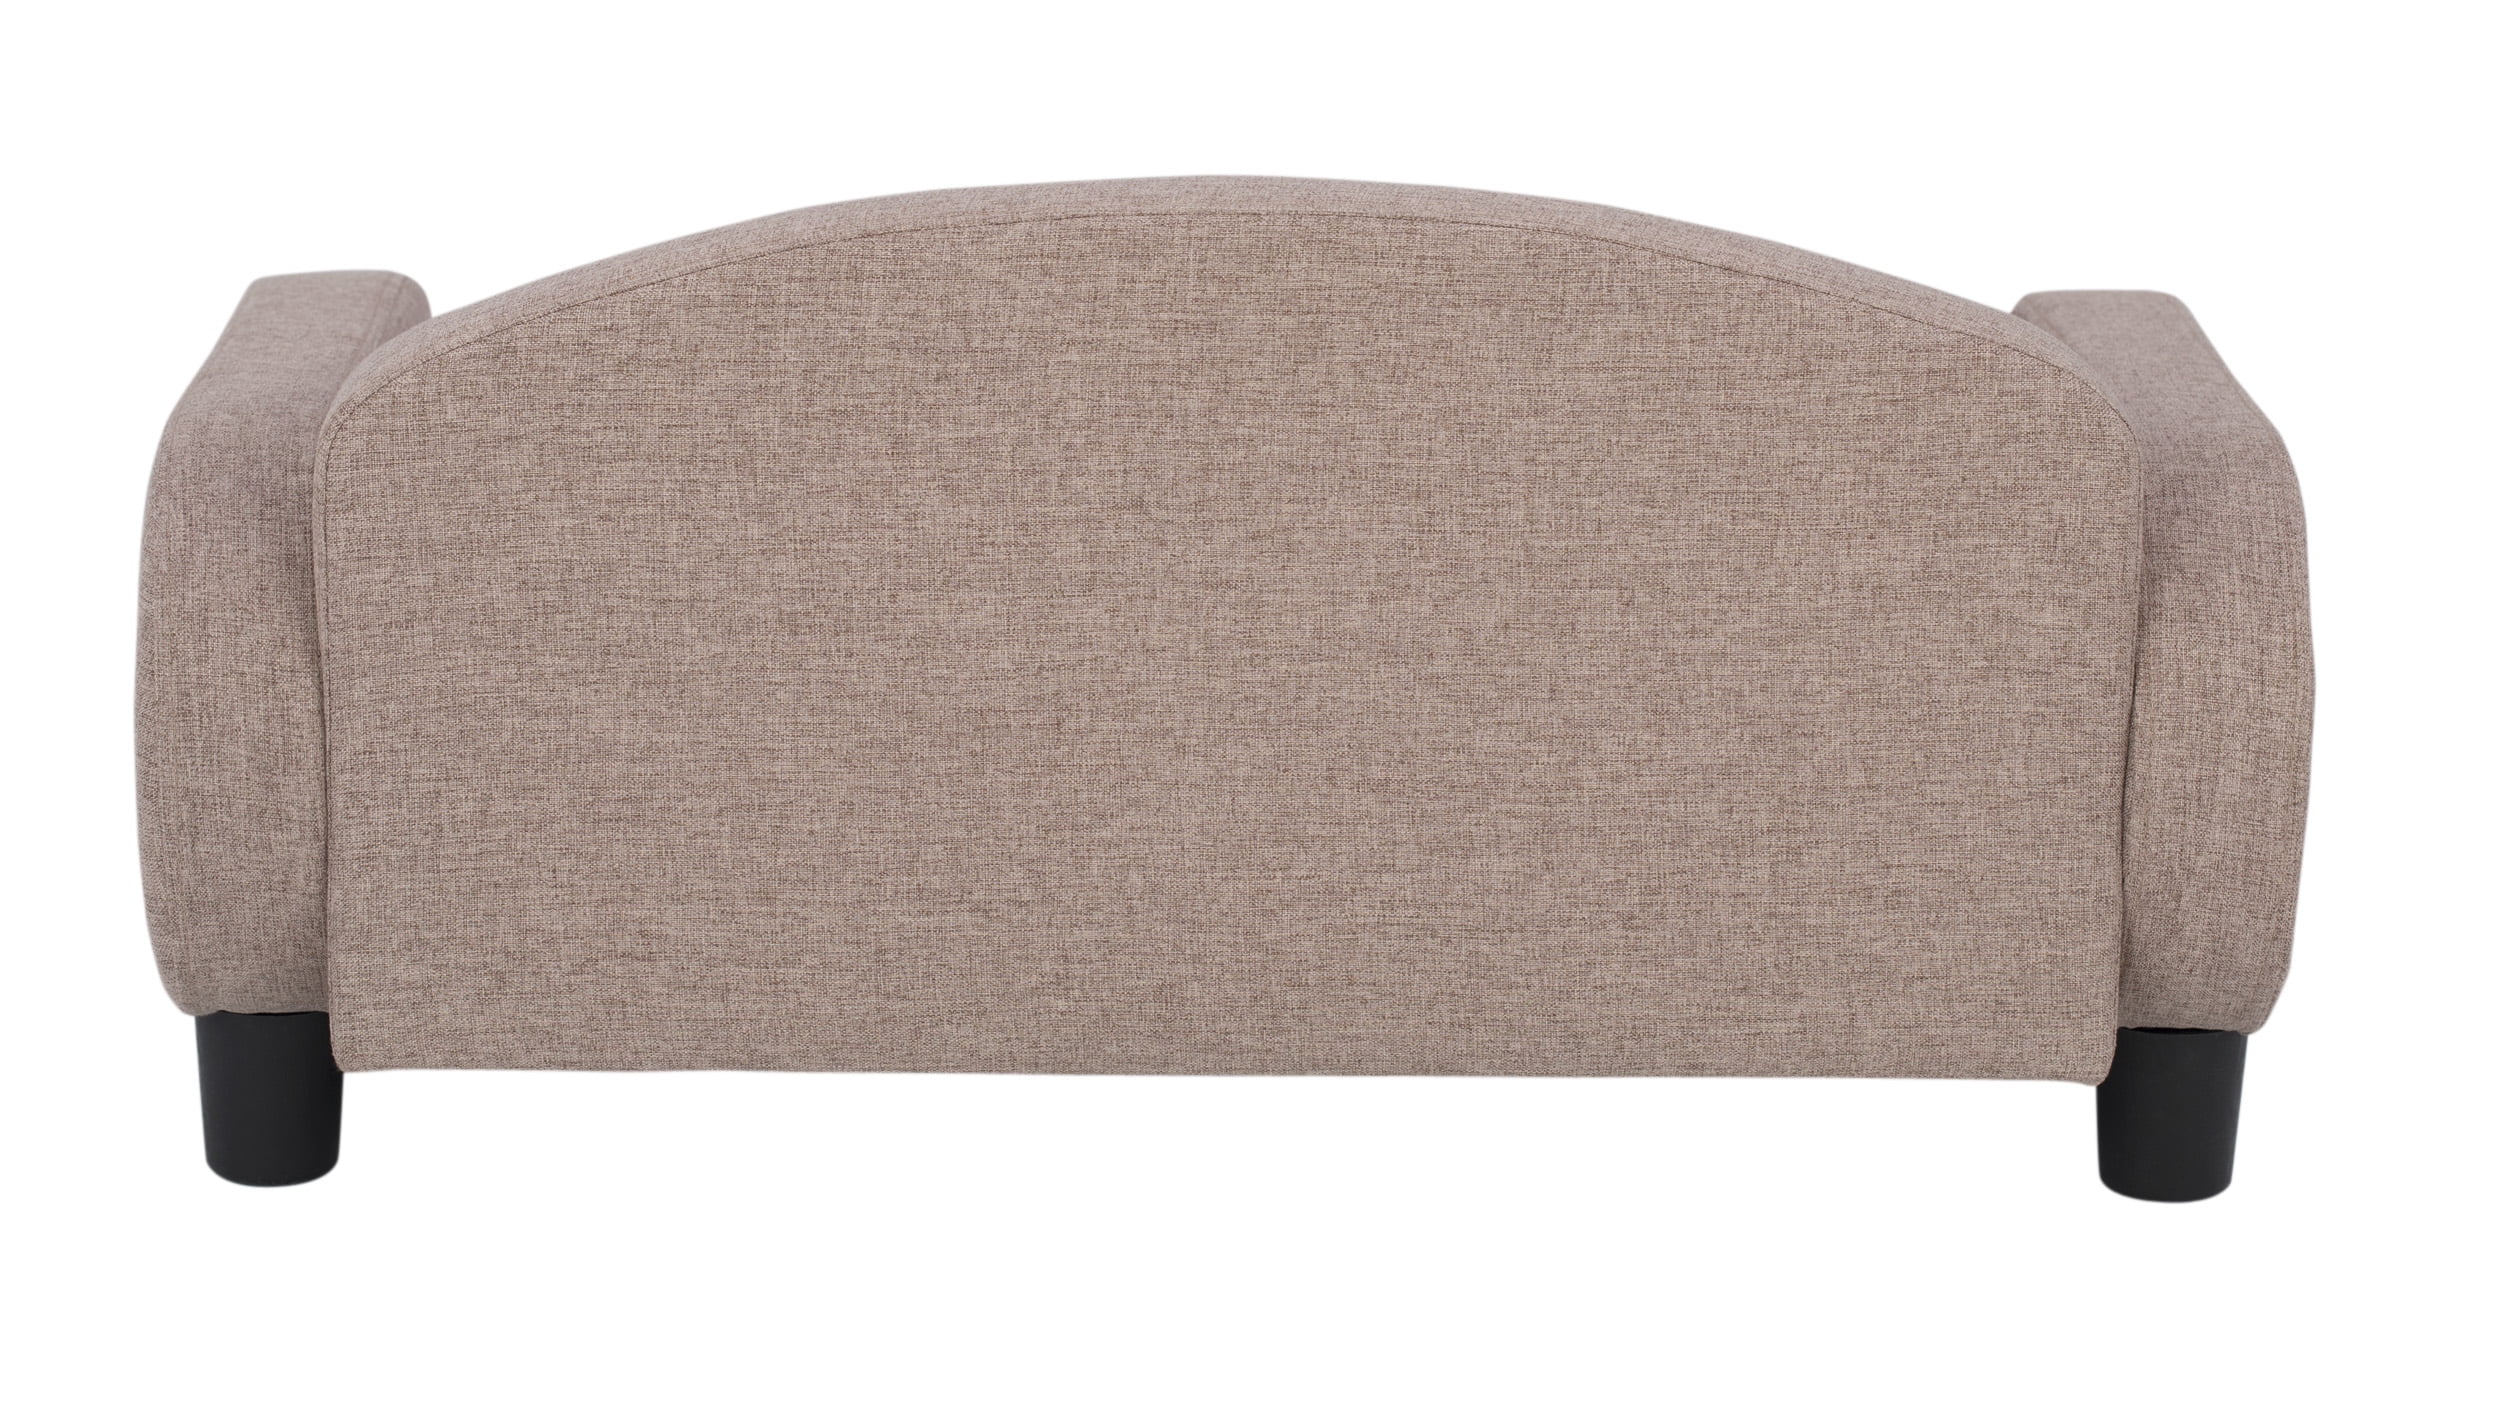 Oatmeal Paws & Purrs Pet Upholstered Sofa Bed 